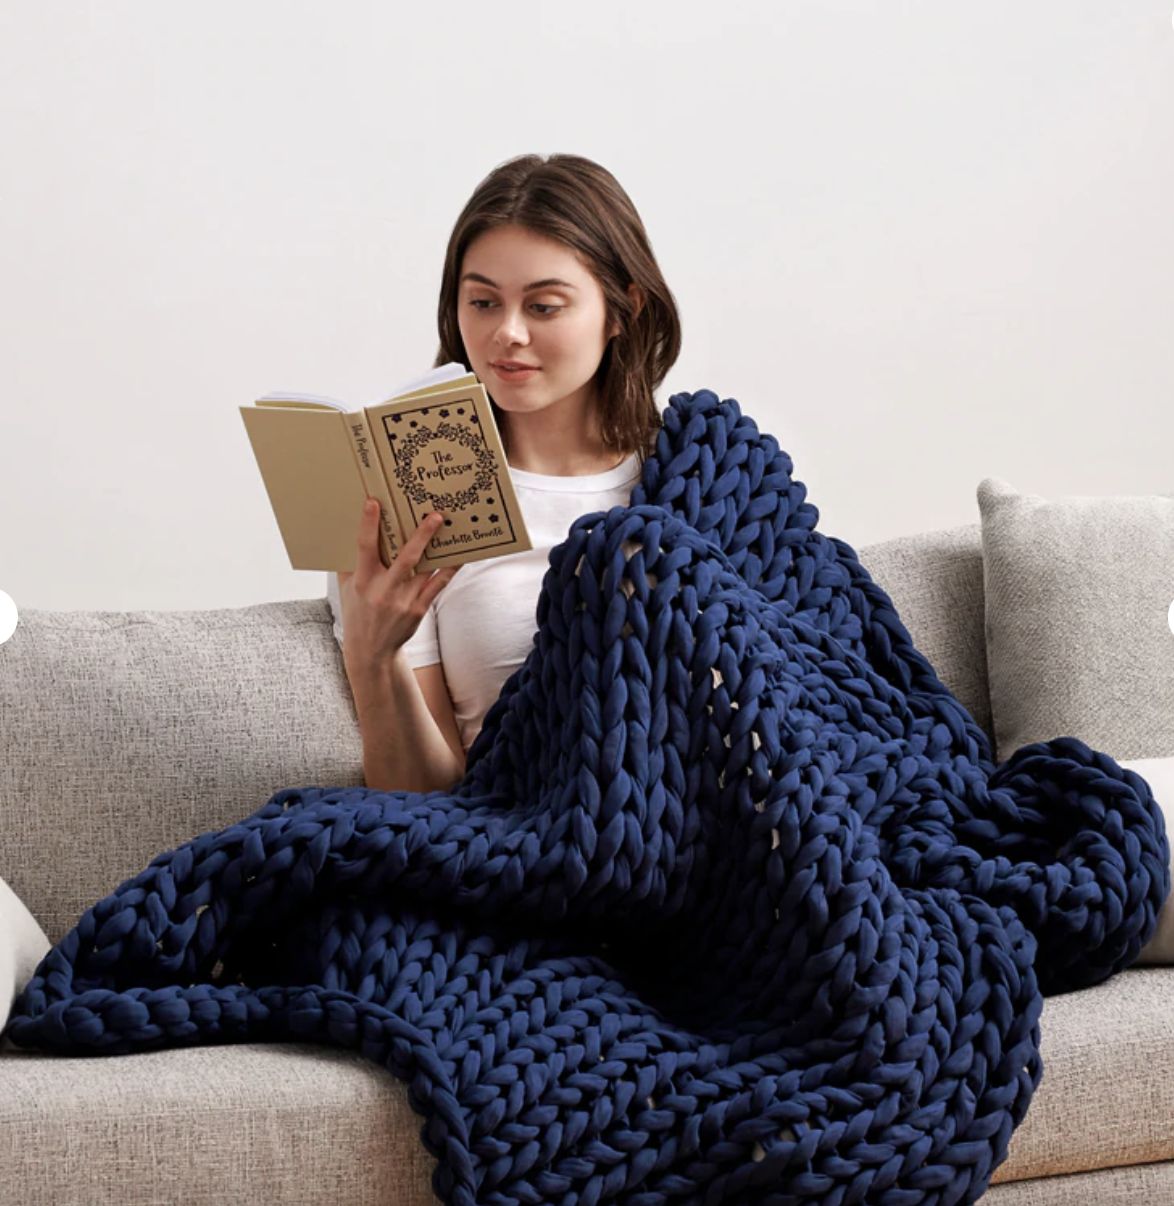 Model reading a book with a navy chunk knitted blanket draped over them